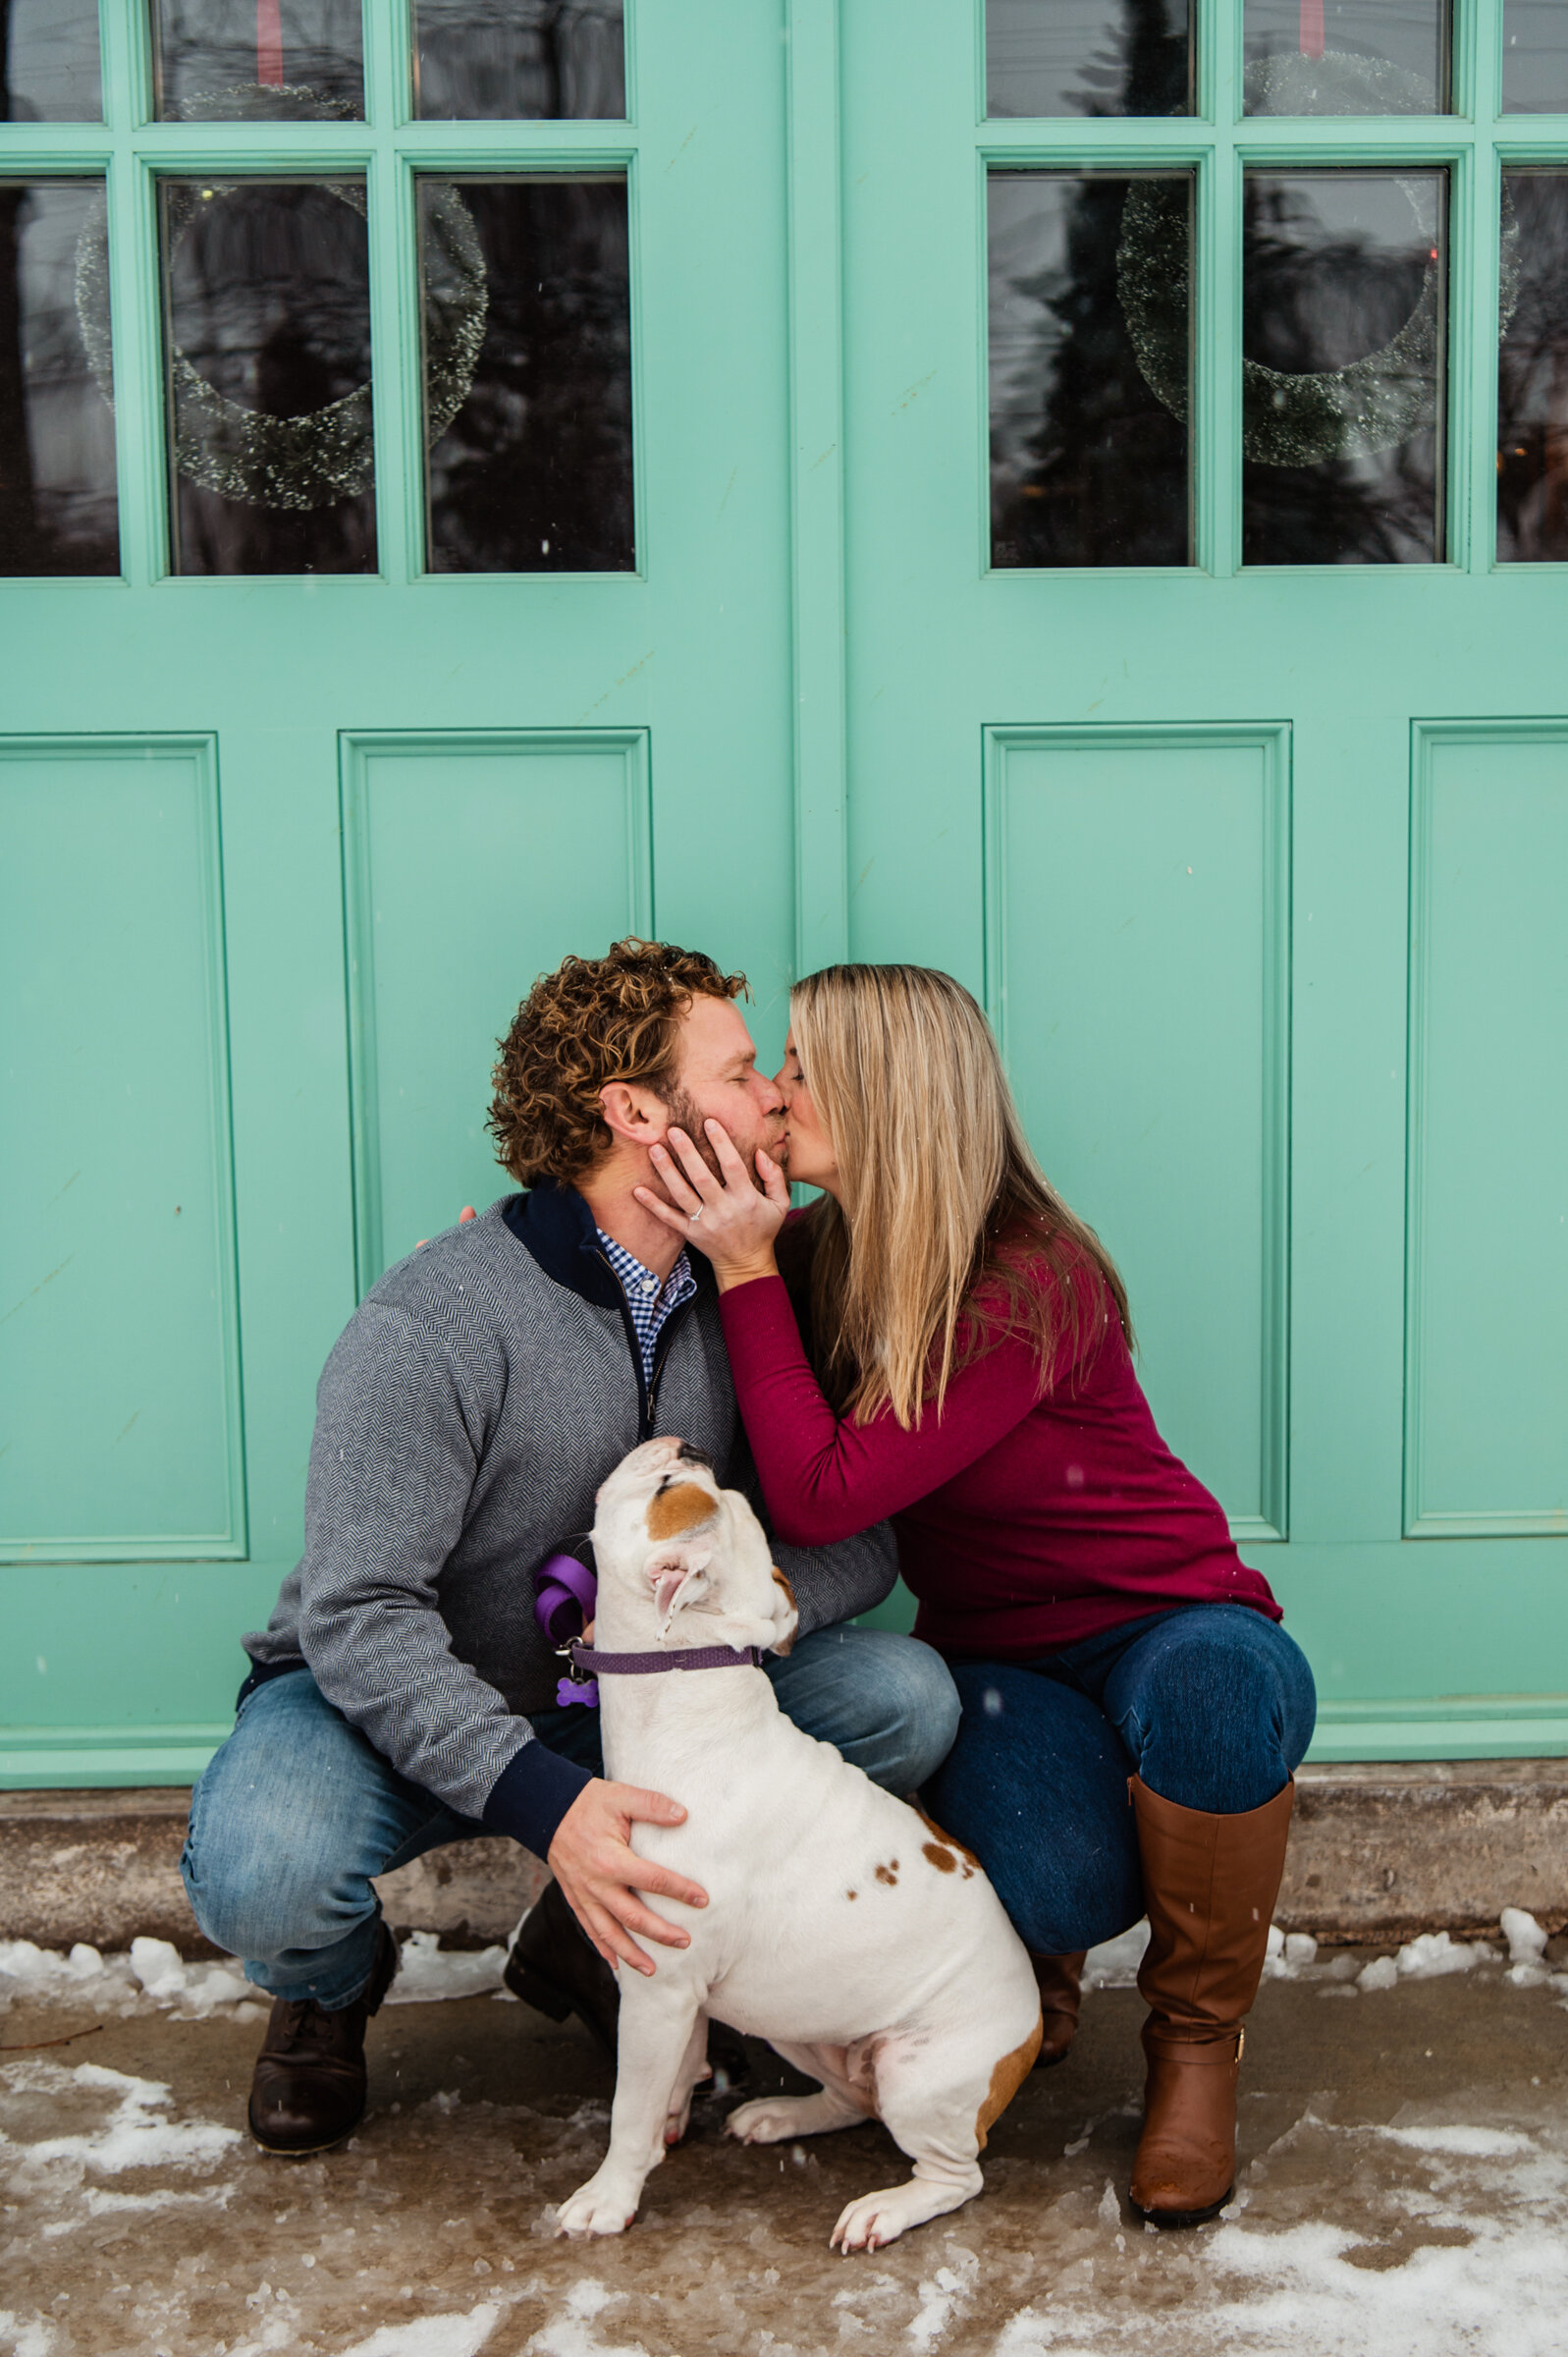 Irondequoit_Beer_Company_Durand_Eastman_Park_Rochester_Engagement_Session_JILL_STUDIO_Rochester_NY_Photographer_6950.jpg